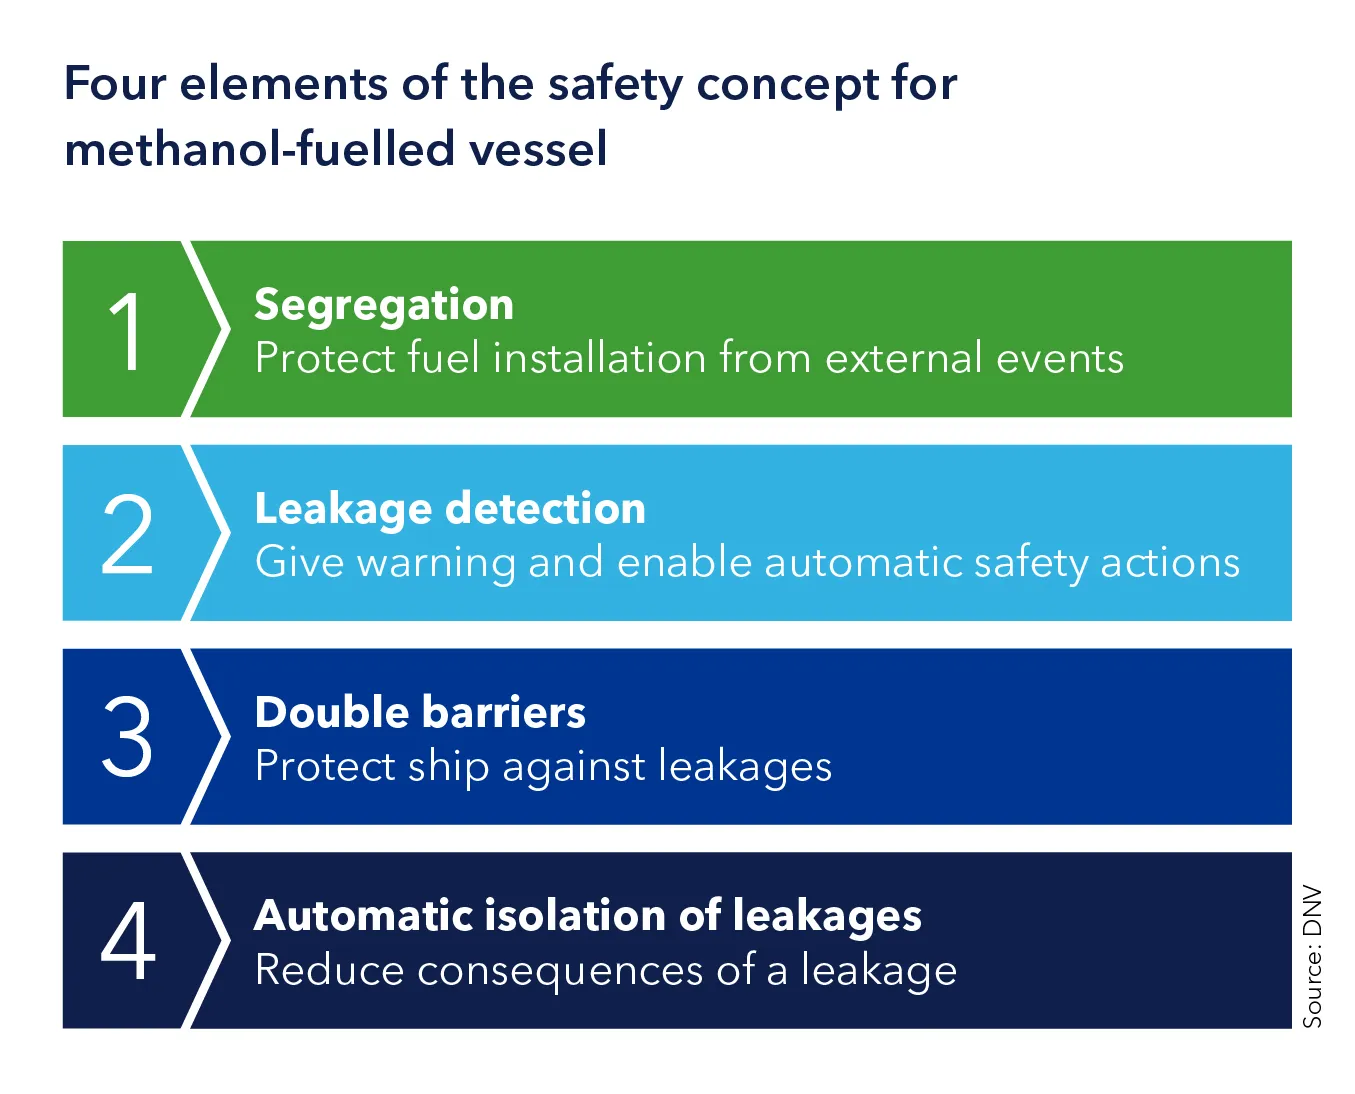 Elements of safety concept